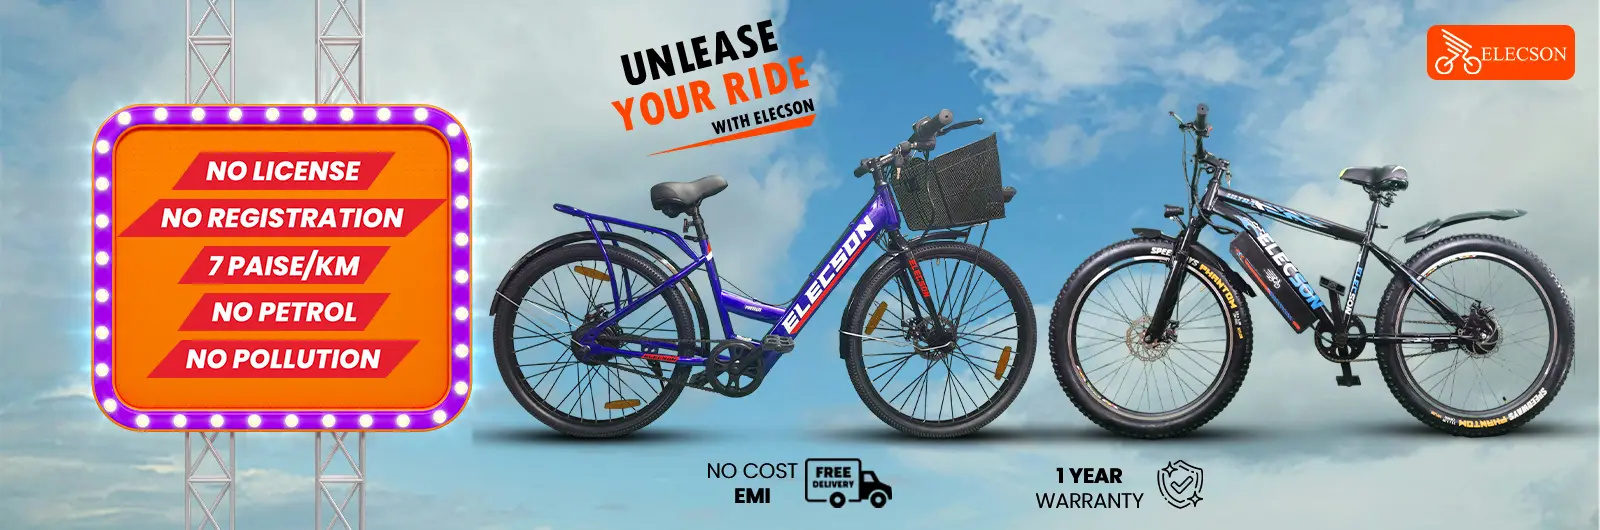 A banner on a bicycle that reads "unlock your ride", encouraging cycling.